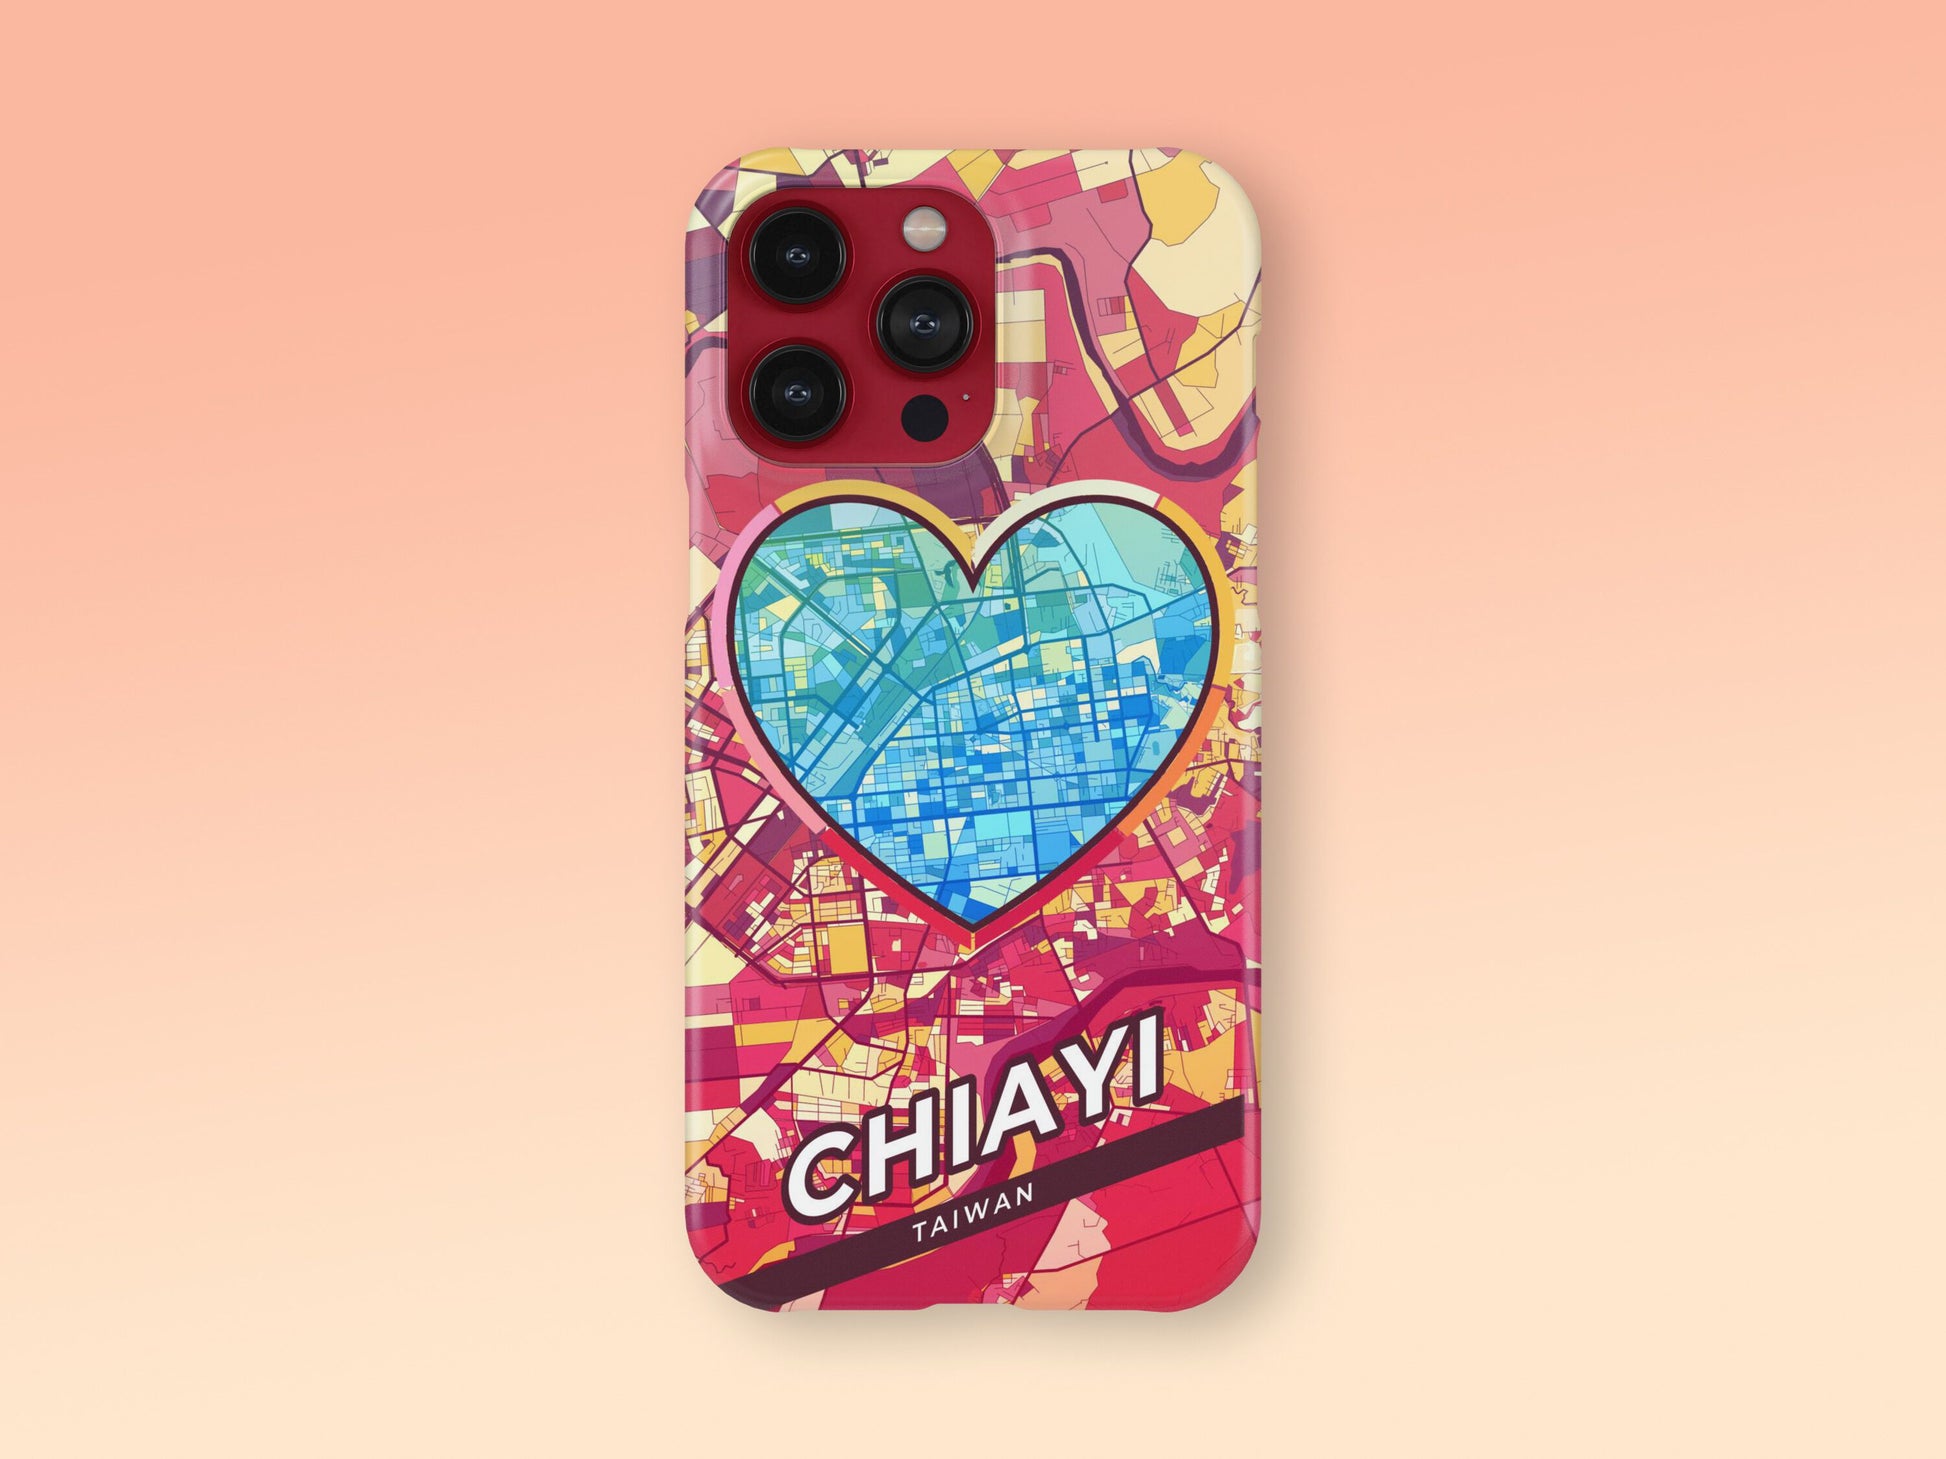 Chiayi Taiwan slim phone case with colorful icon. Birthday, wedding or housewarming gift. Couple match cases. 2